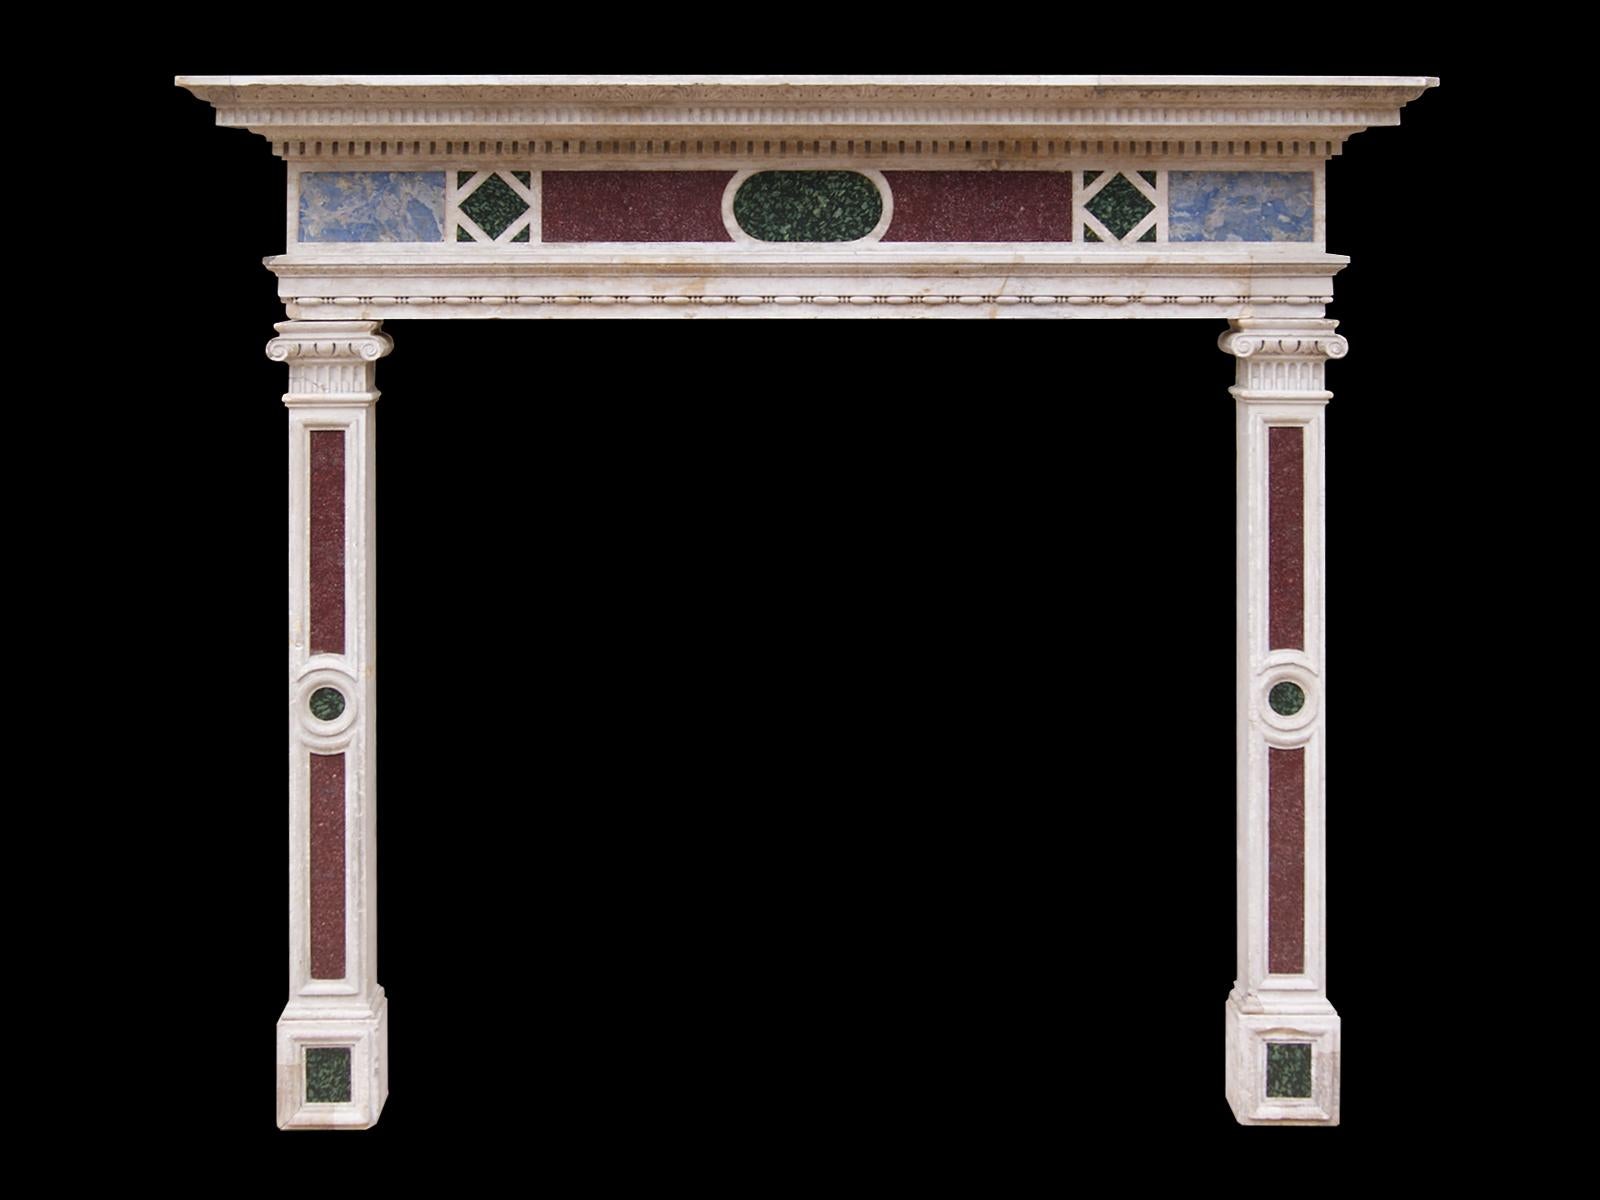 An Italianate style 19th century fireplace carved in Istrian stone with semi-precious inlaid marble frieze panels of Egyptian Imperial red porphyry, ancient green Peloponnesian Porphyry and Lazurite, supported on similarly panelled jambs. The jambs